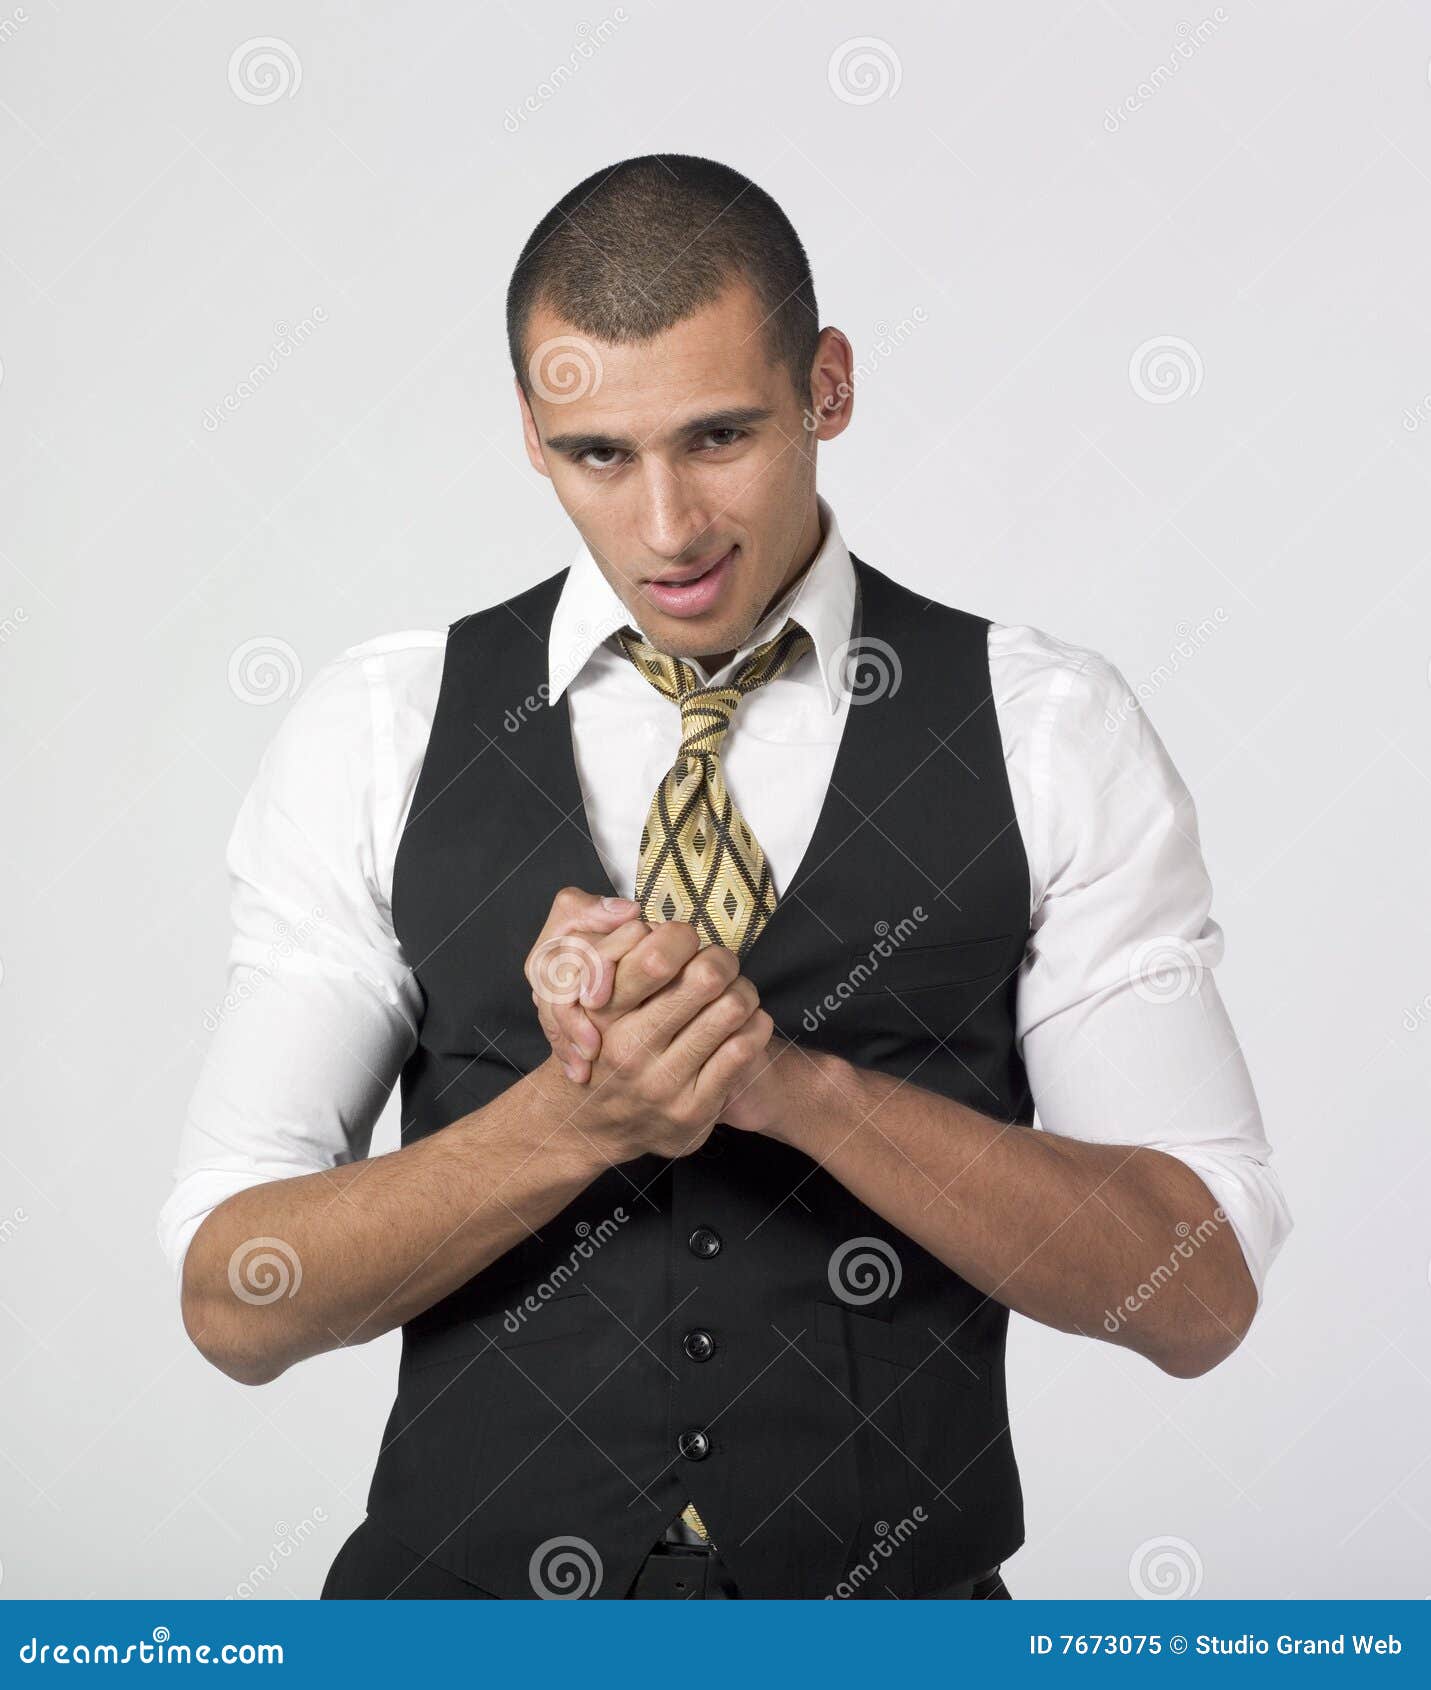 businessman rubbing hands with a smirk